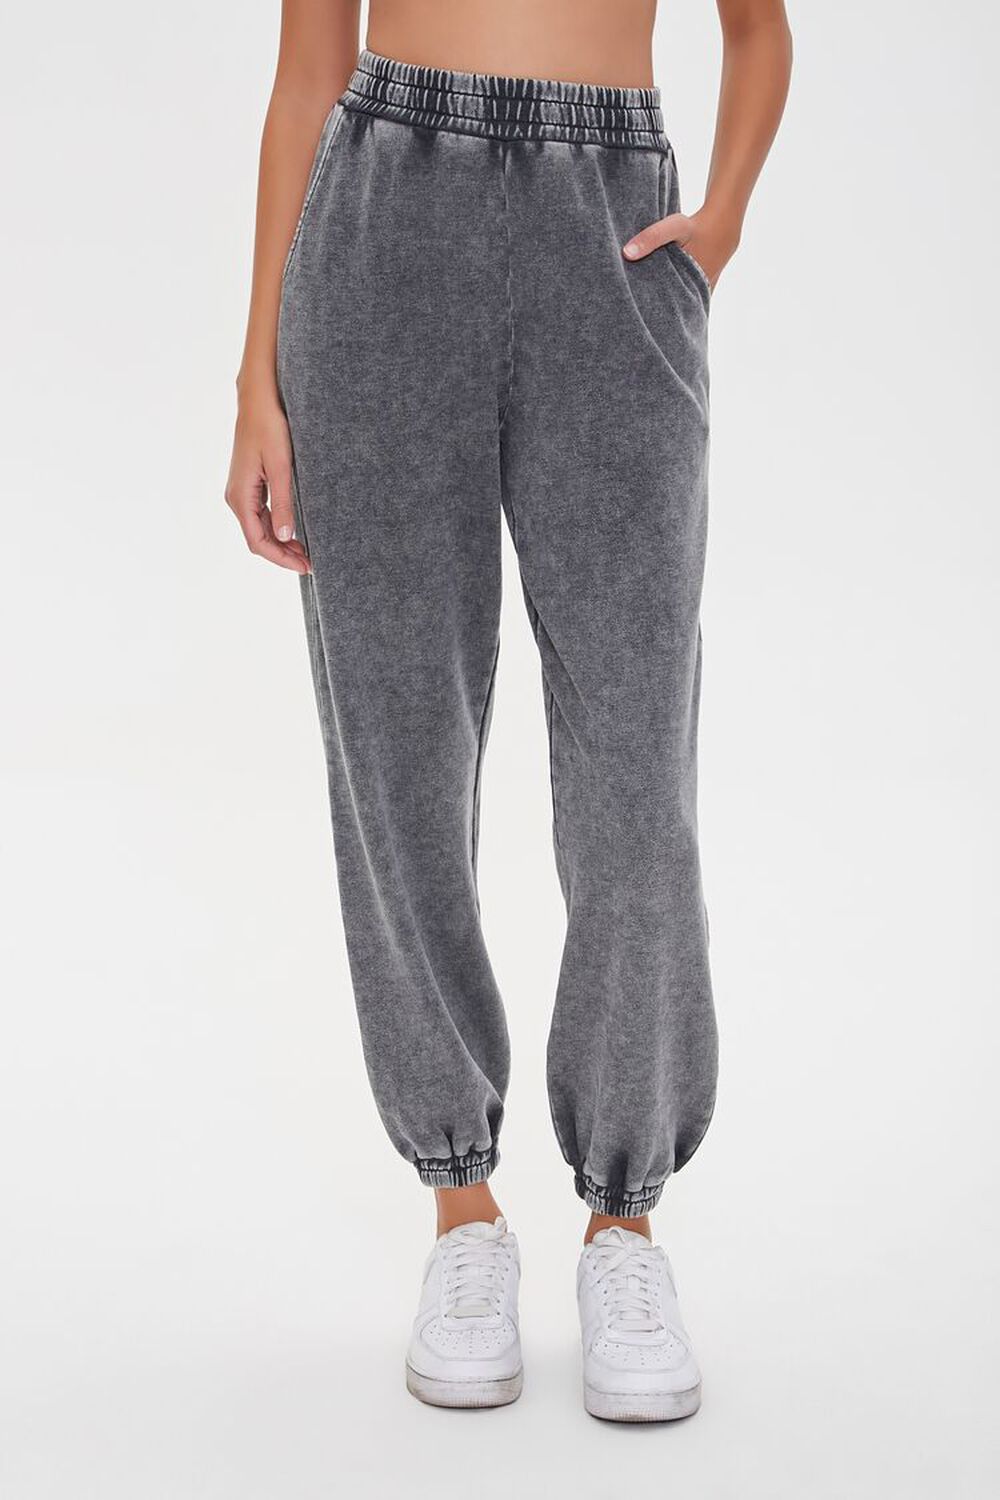 CHARCOAL Oil Wash Smocked Joggers, image 2